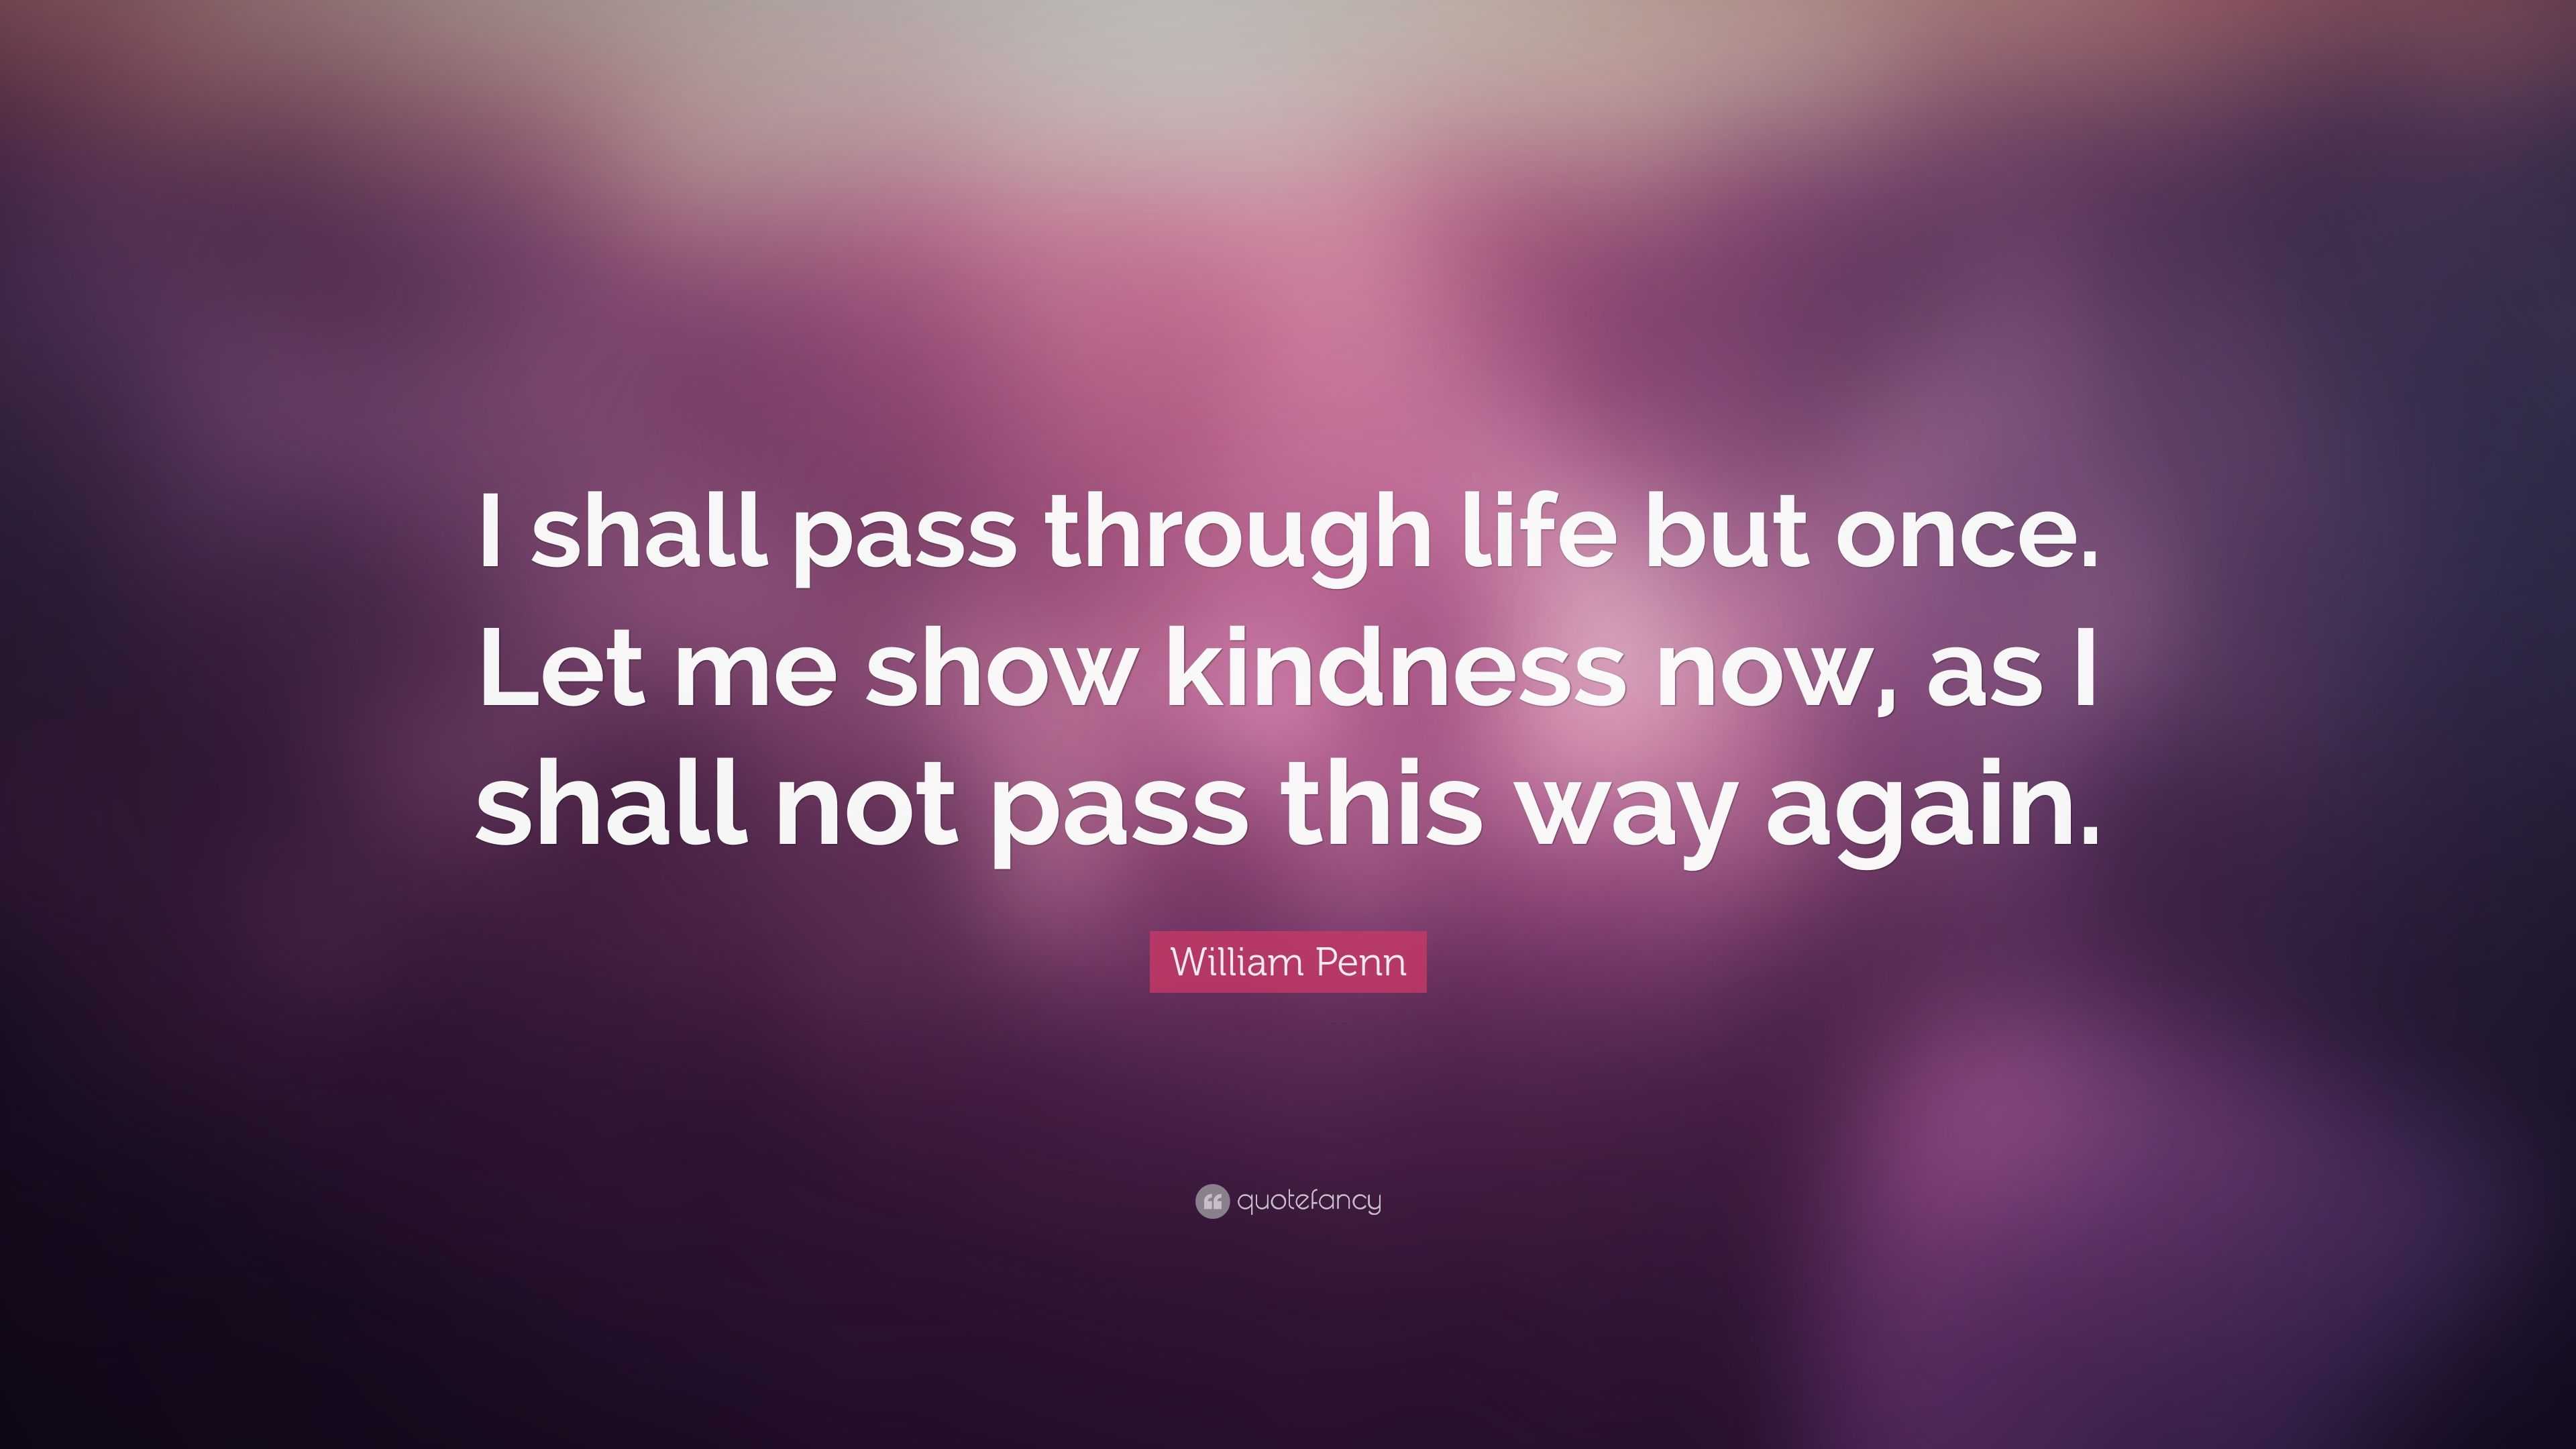 William Penn Quote: “I shall pass through life but once. Let me show ...